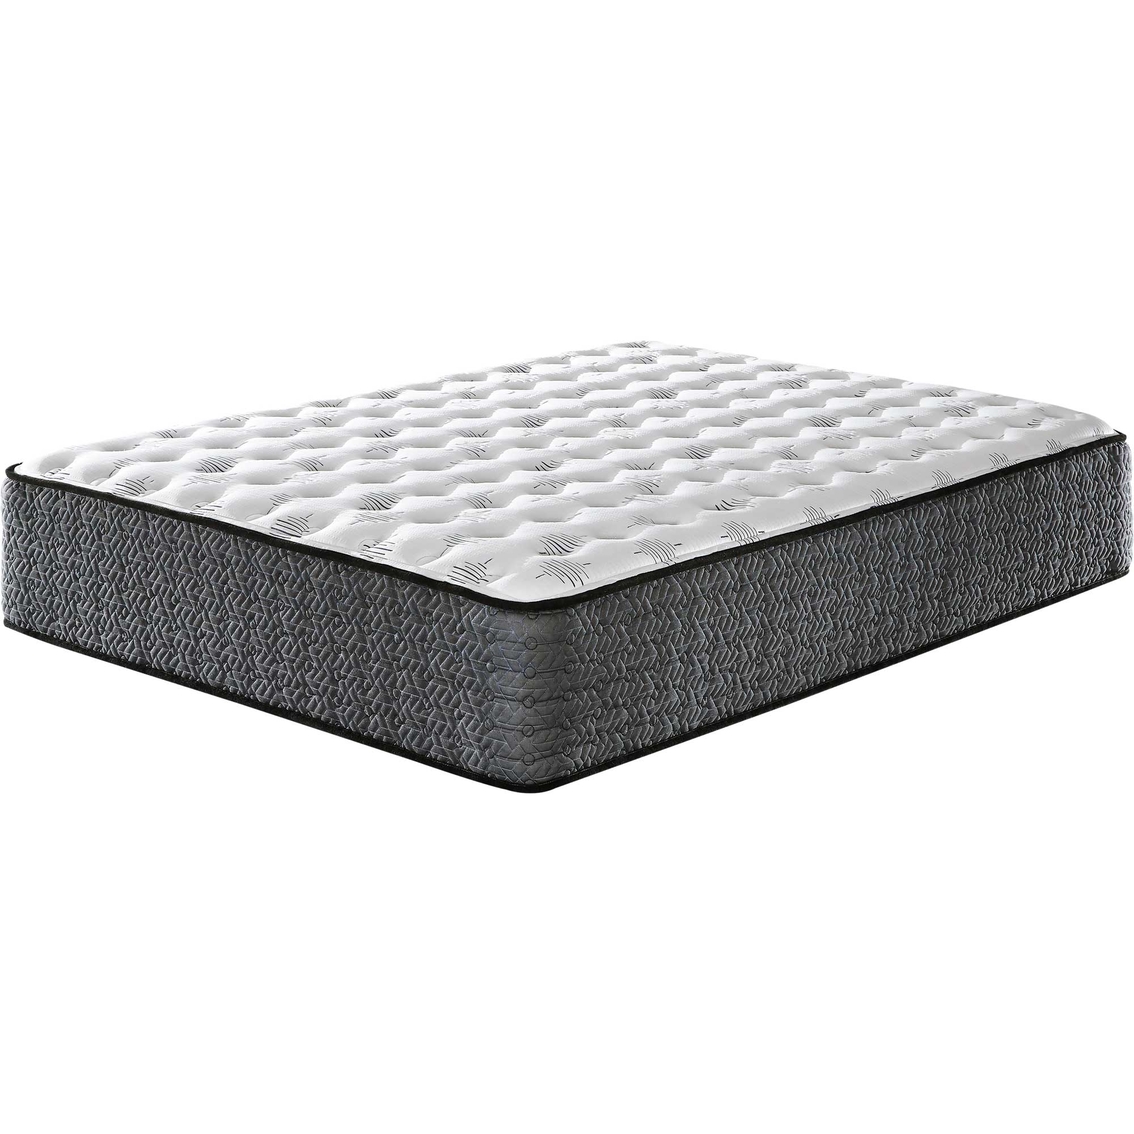 Sierra Sleep by Ashley Ultra Luxury Firm Tight Top with Memory Foam Mattress - Image 1 of 5